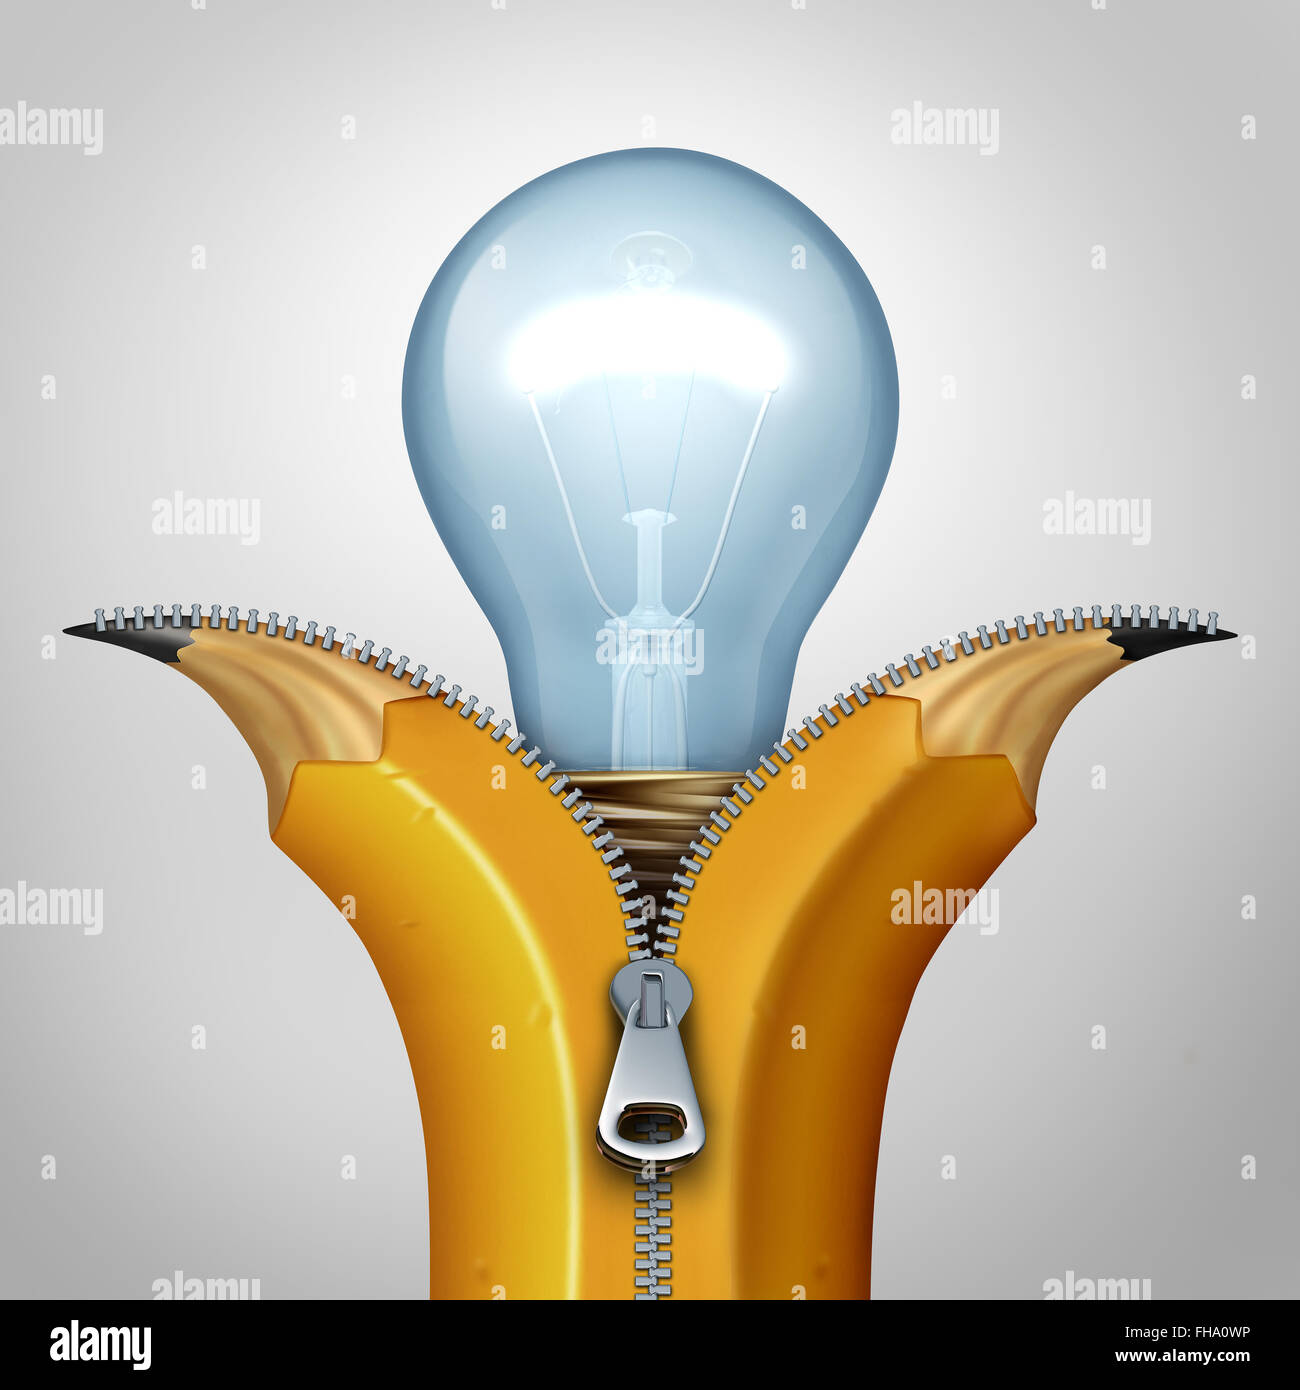 Open creativity strategy and business concept as an opened zipper on a pencil being unzipped and revealing a bright lightbulb icon as a metaphor for innovation invention and discovery. Stock Photo